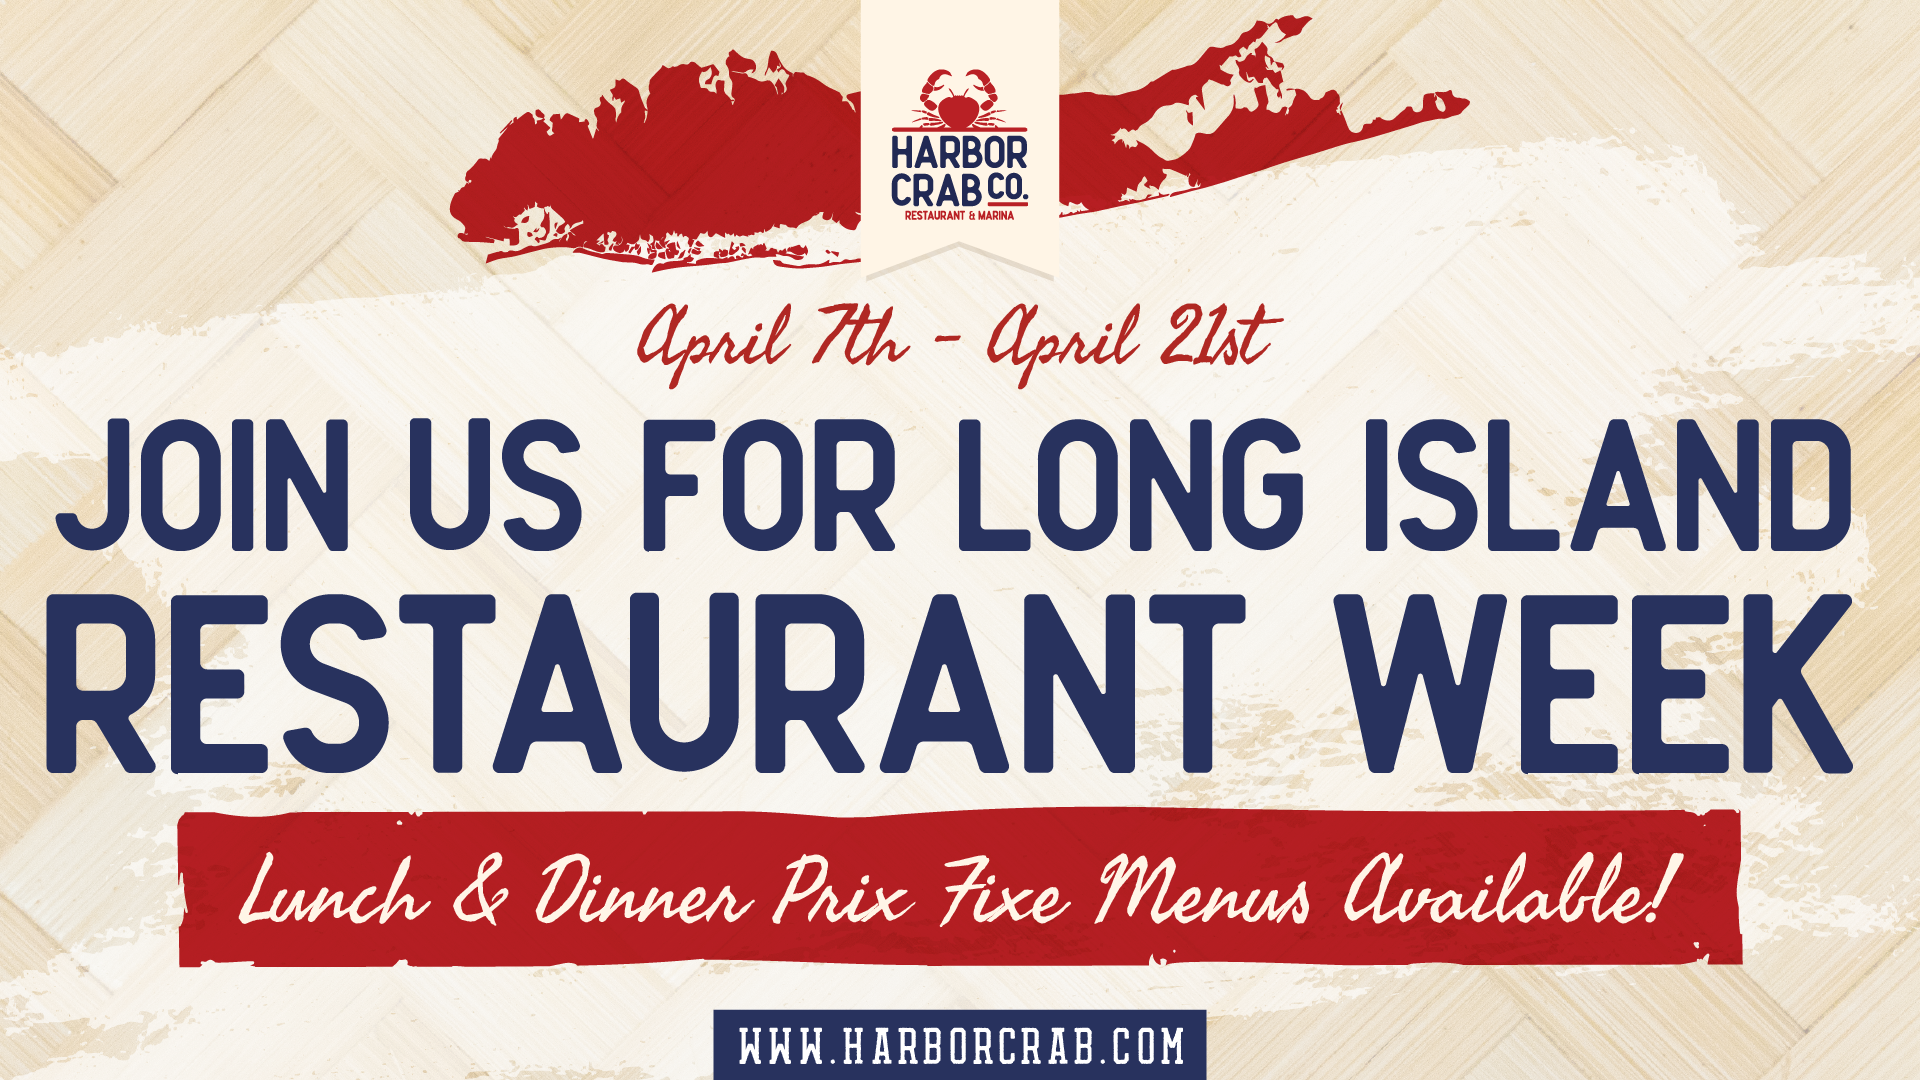 oin Harbor Crab Co. for Long Island Restaurant Week, April 7th - 21st, featuring special prix fixe menus.